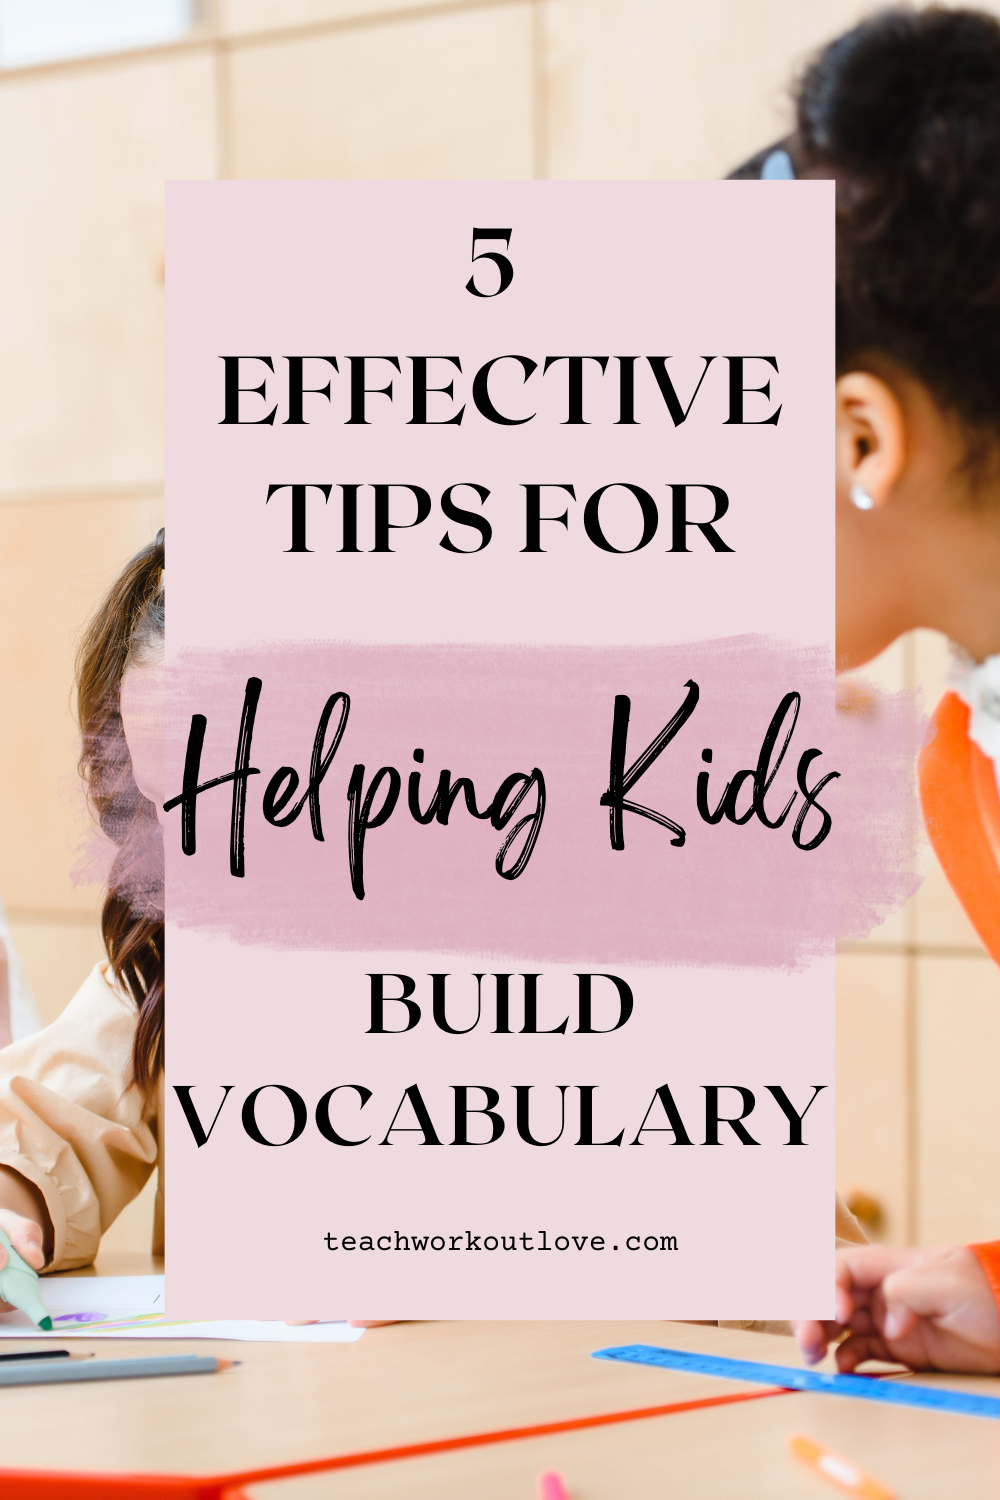 Every parent would love their children to have a long flowing vocabulary. Let's take a look at a few tips you can follow to enrich your children's vocabulary.